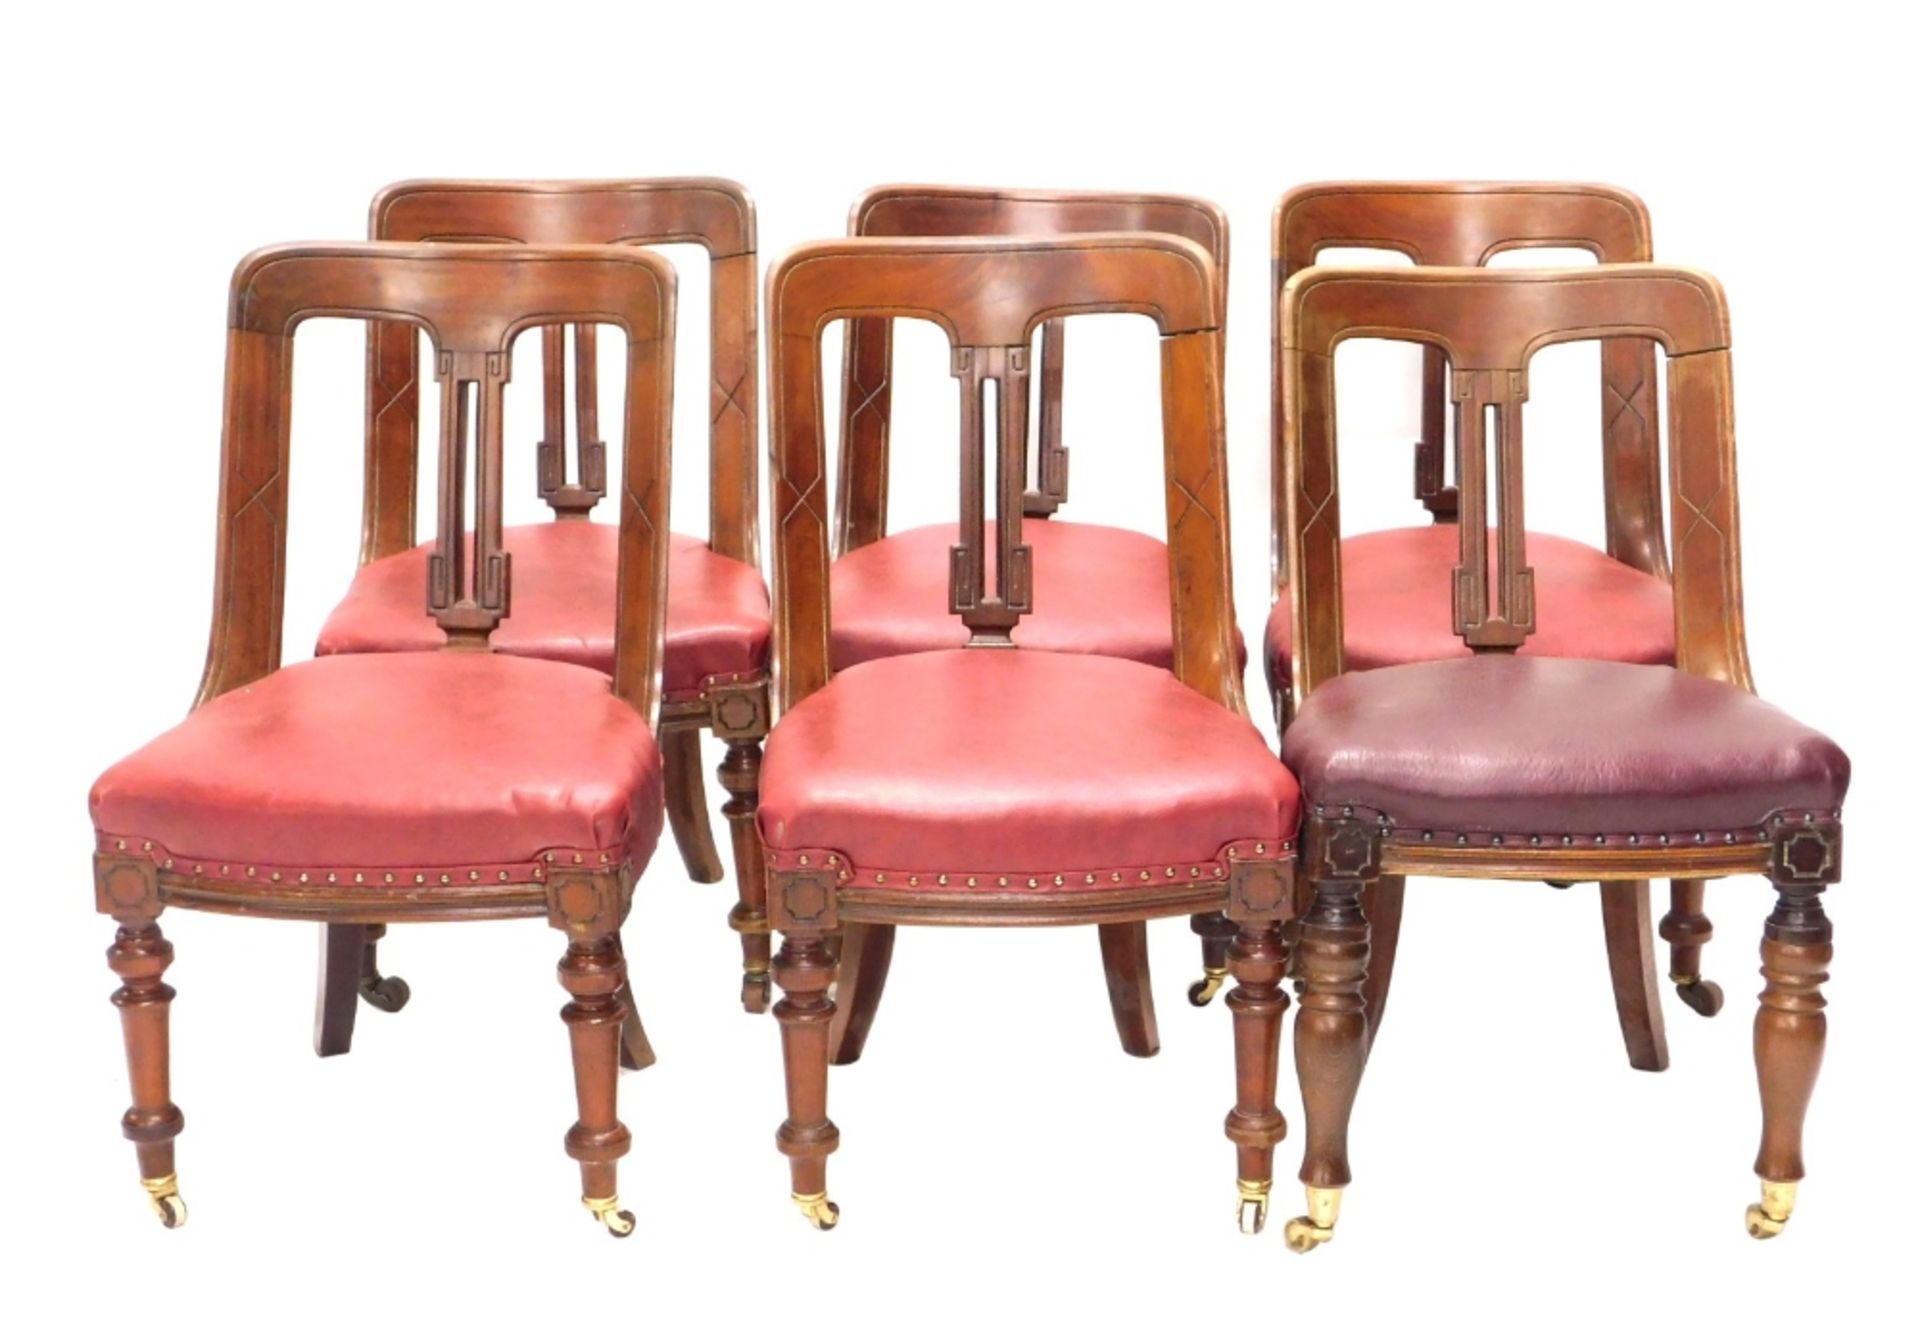 A set of four Victorian mahogany spoon back dining chairs, each with a solid splat and red upholster